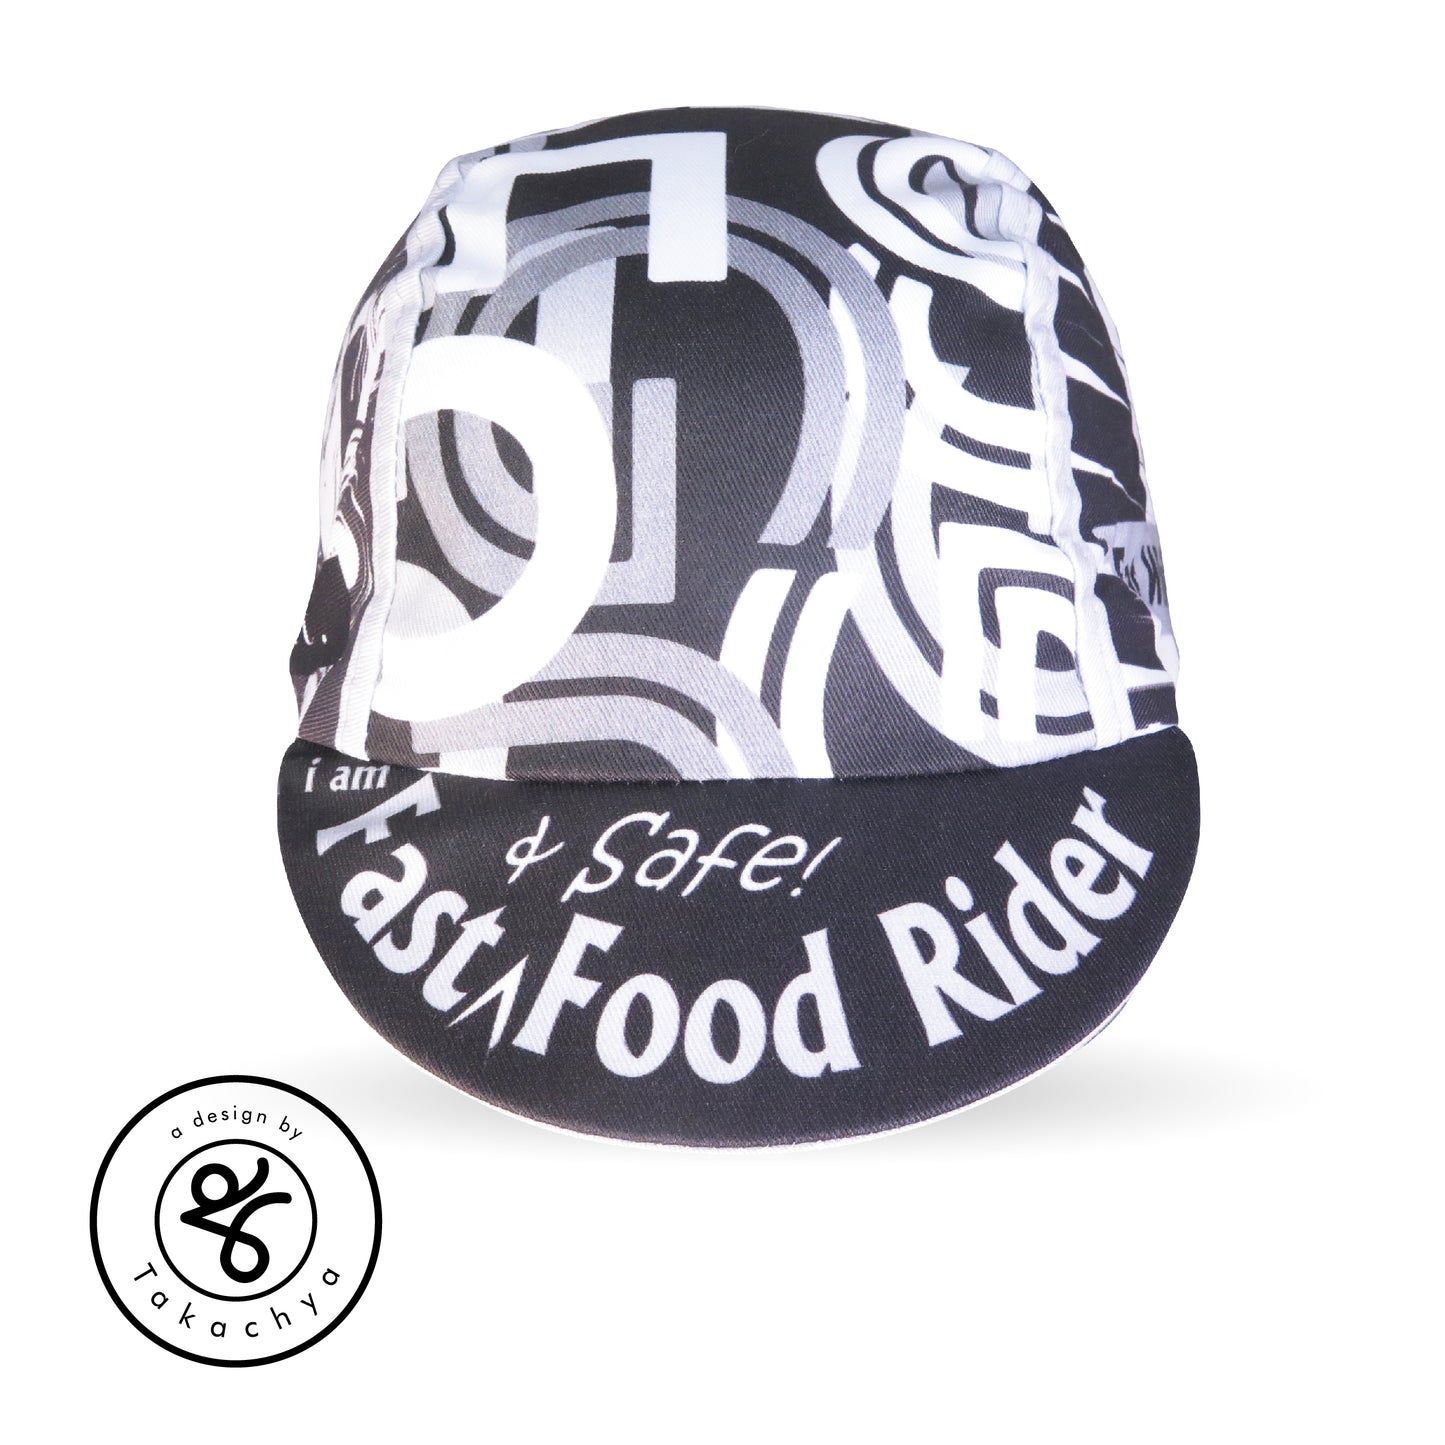 I am Fast Food Rider Grayscale - A Design by Takachya Cycling Cap